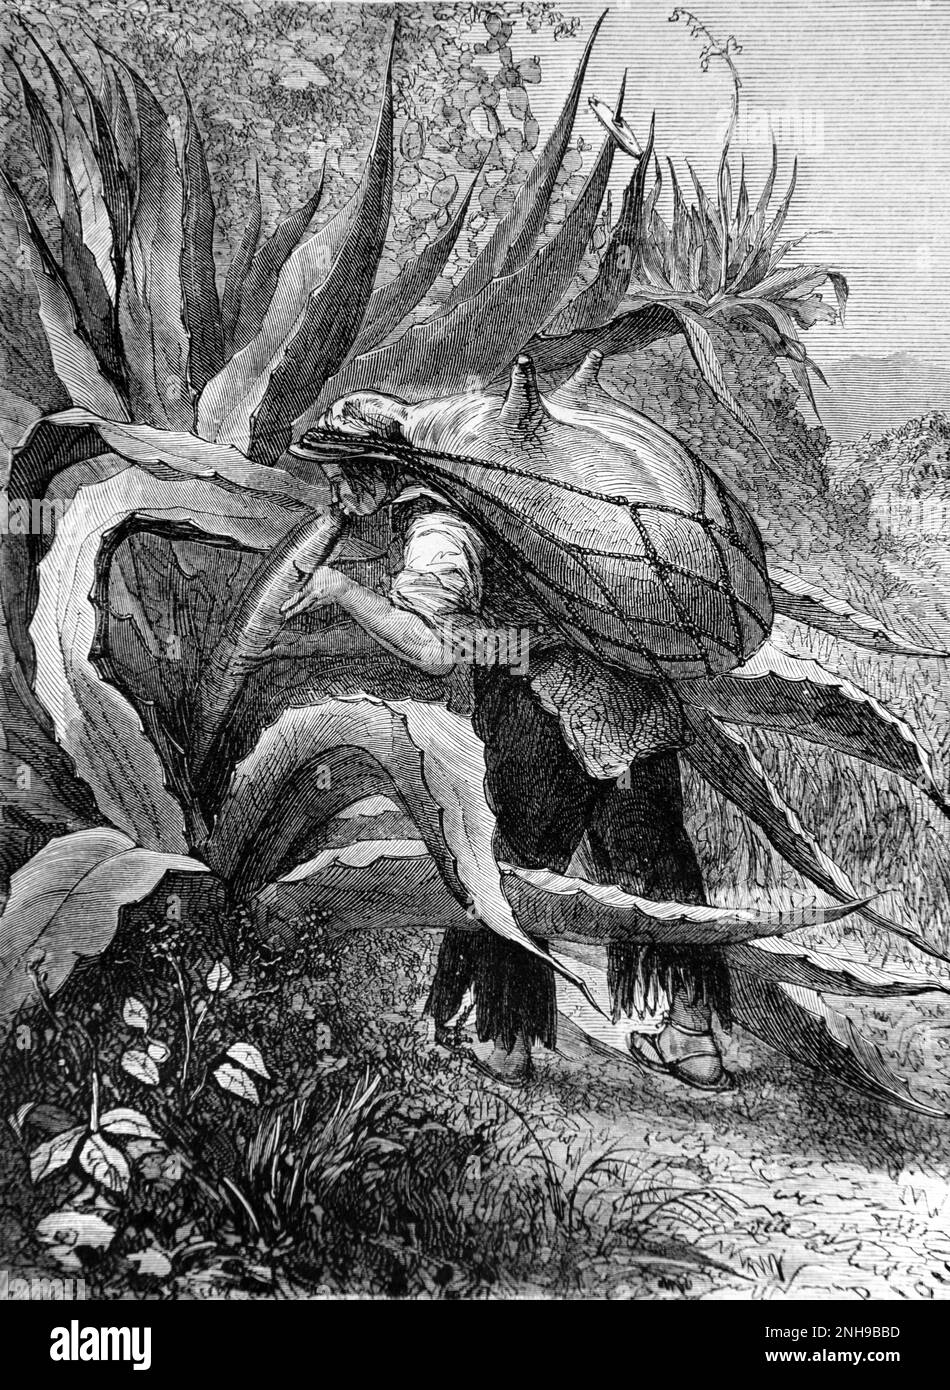 Harvesting Pulque or Octli, from Maguey, Agave Plant, Century Plant or Agave Americana in Mexico.  Vintage Engraving or Illustration 1862 Stock Photo